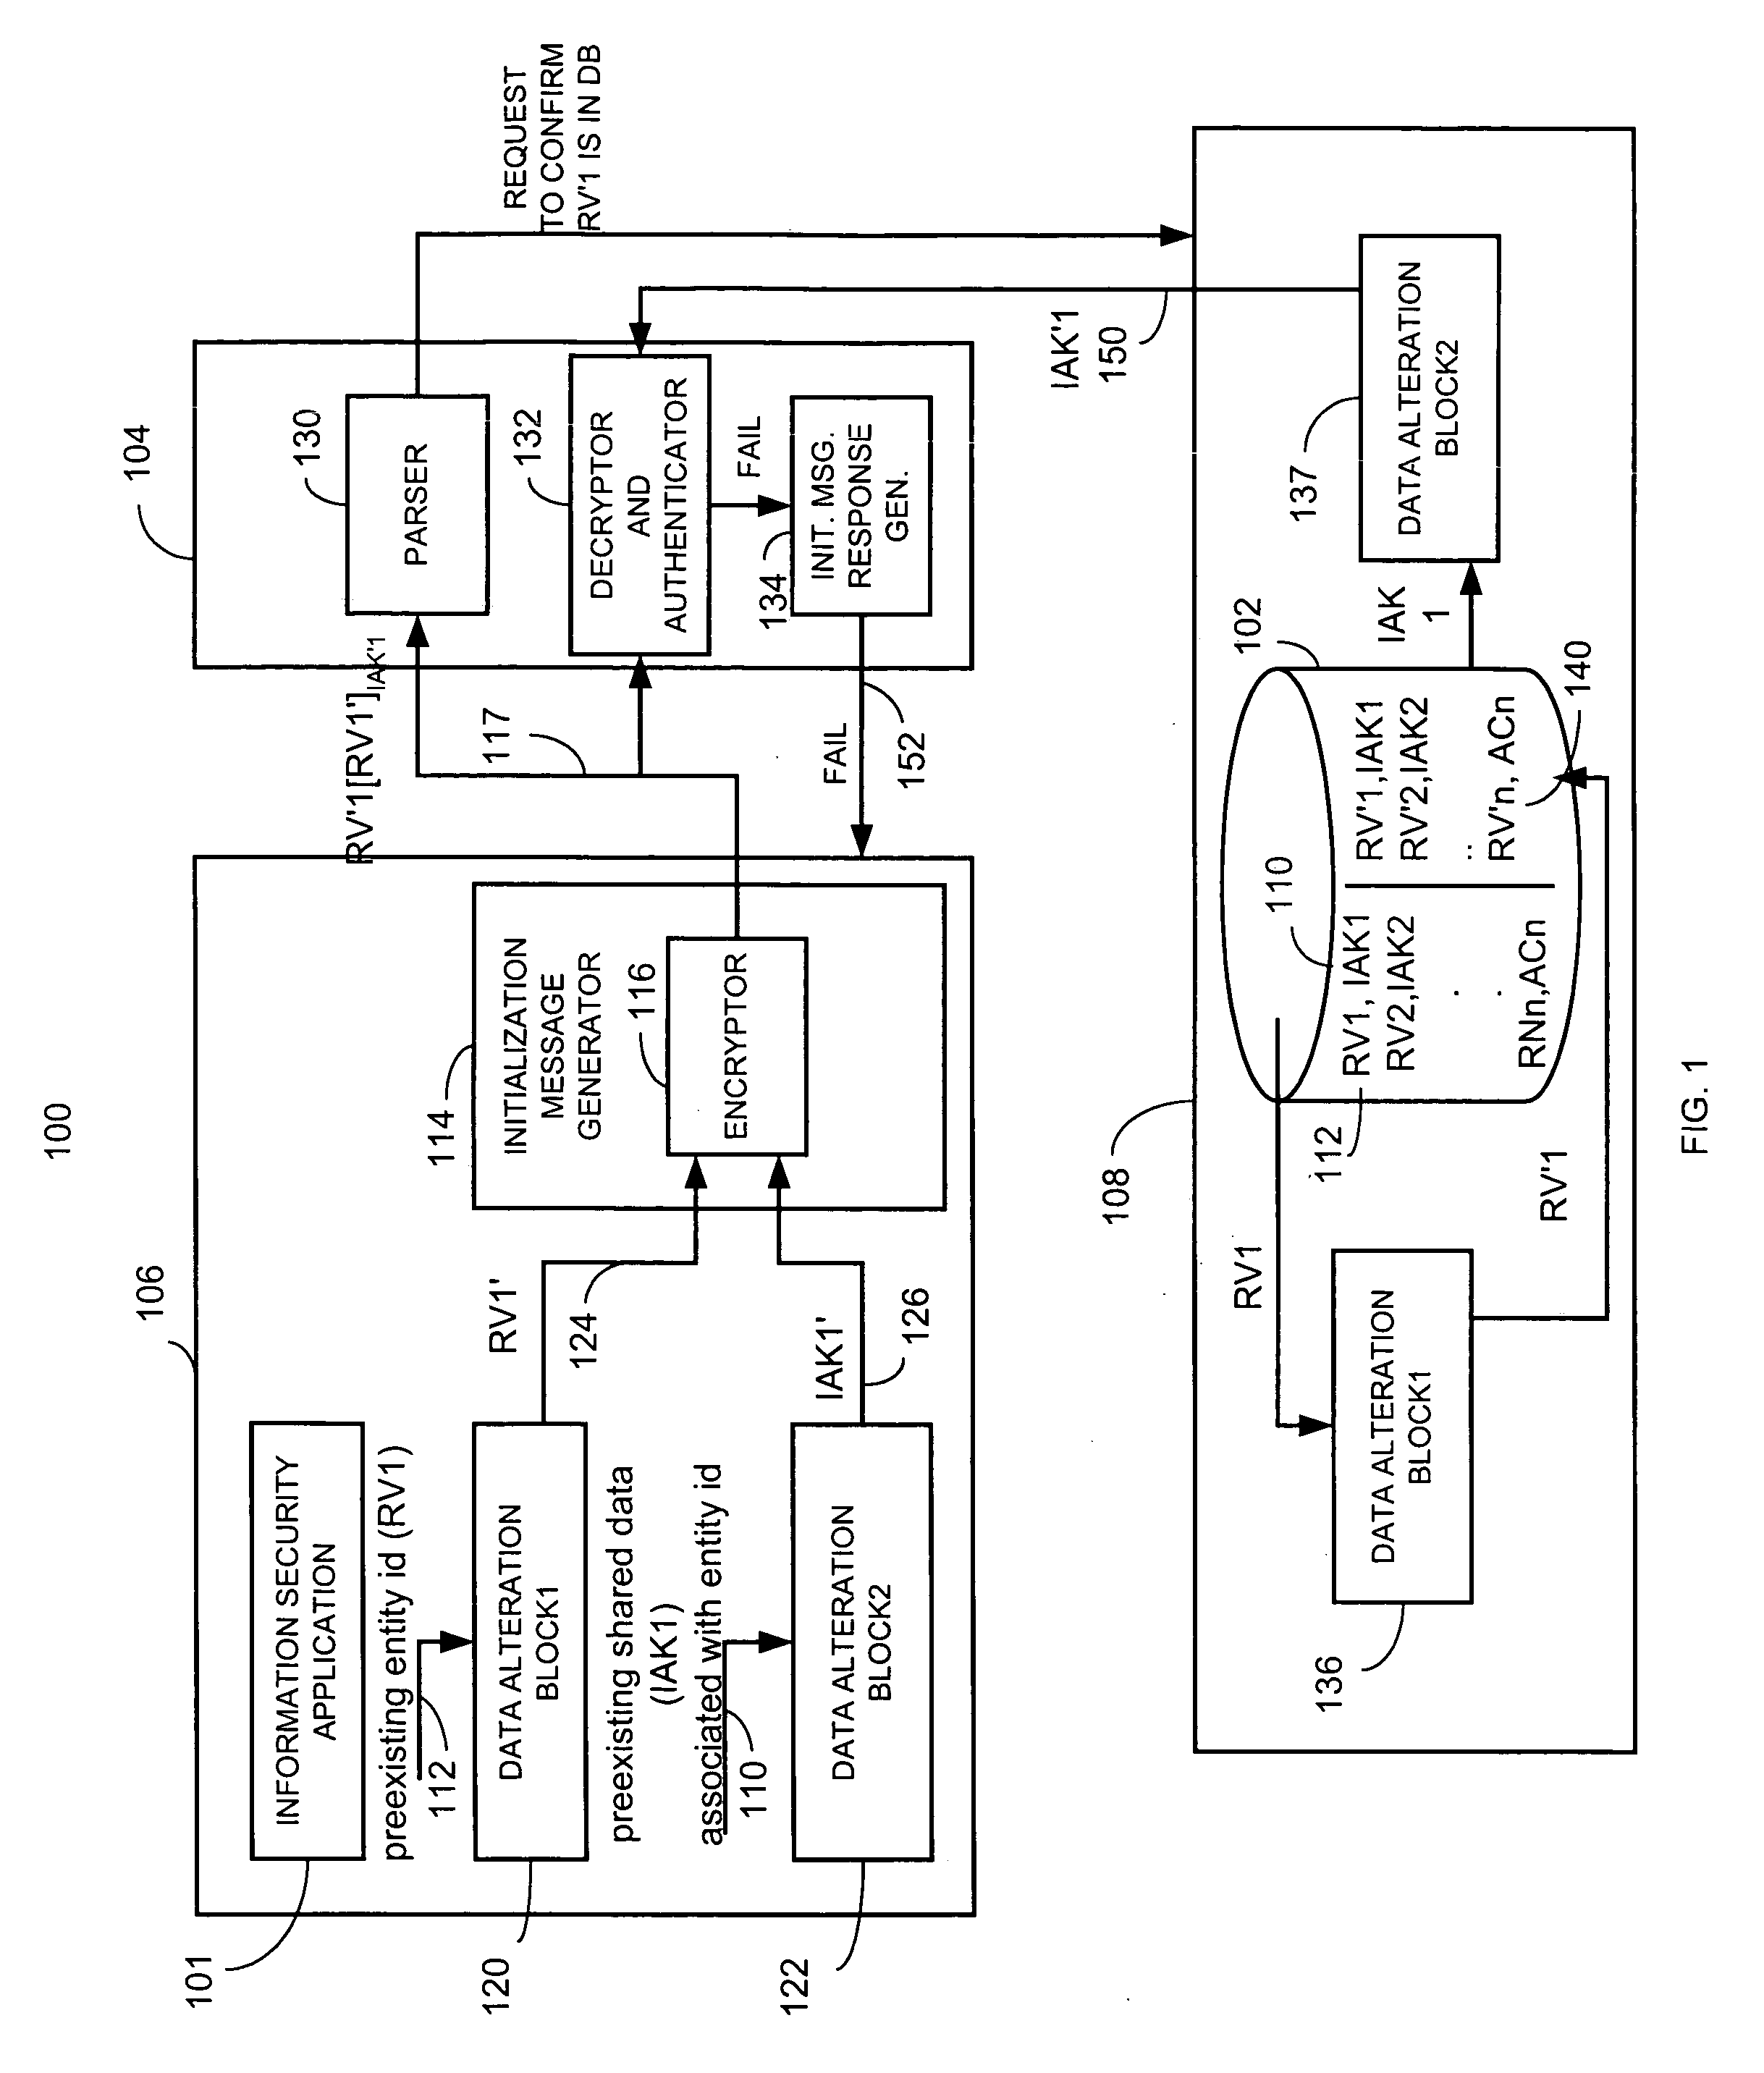 Shared data initialization query system and method